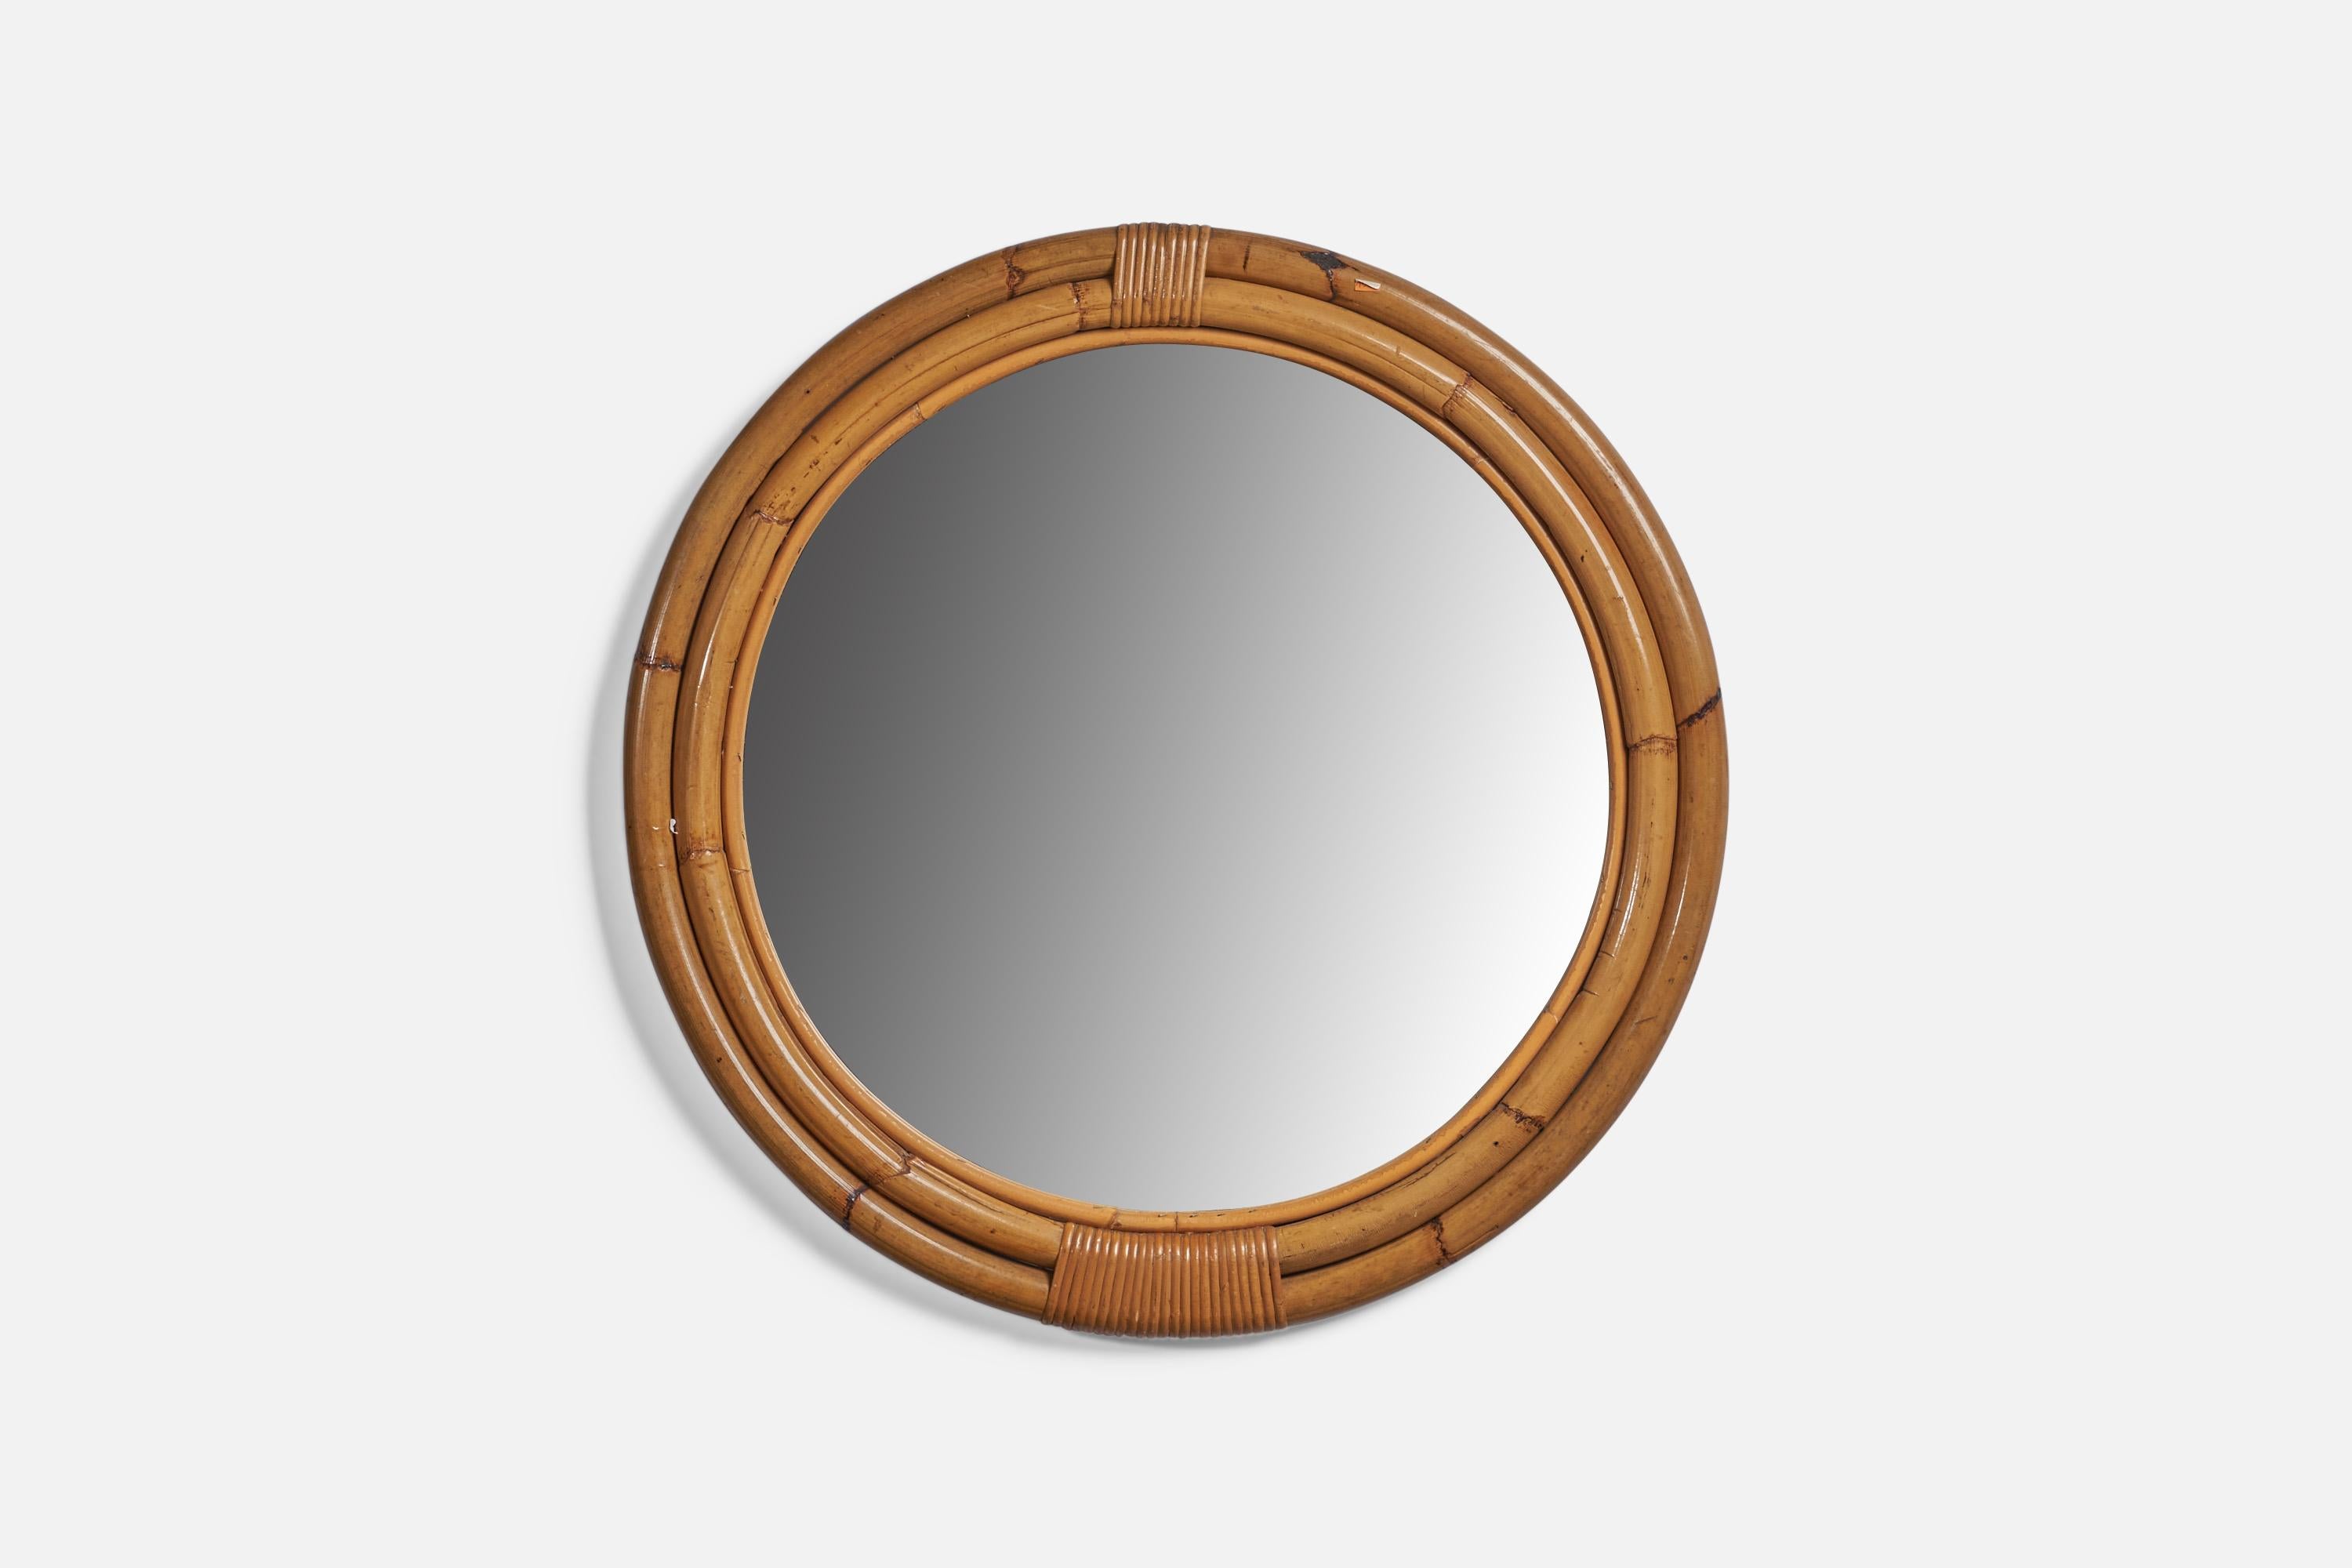 A round bamboo and rattan wall mirror, designed and produced in Italy, c. 1950s.